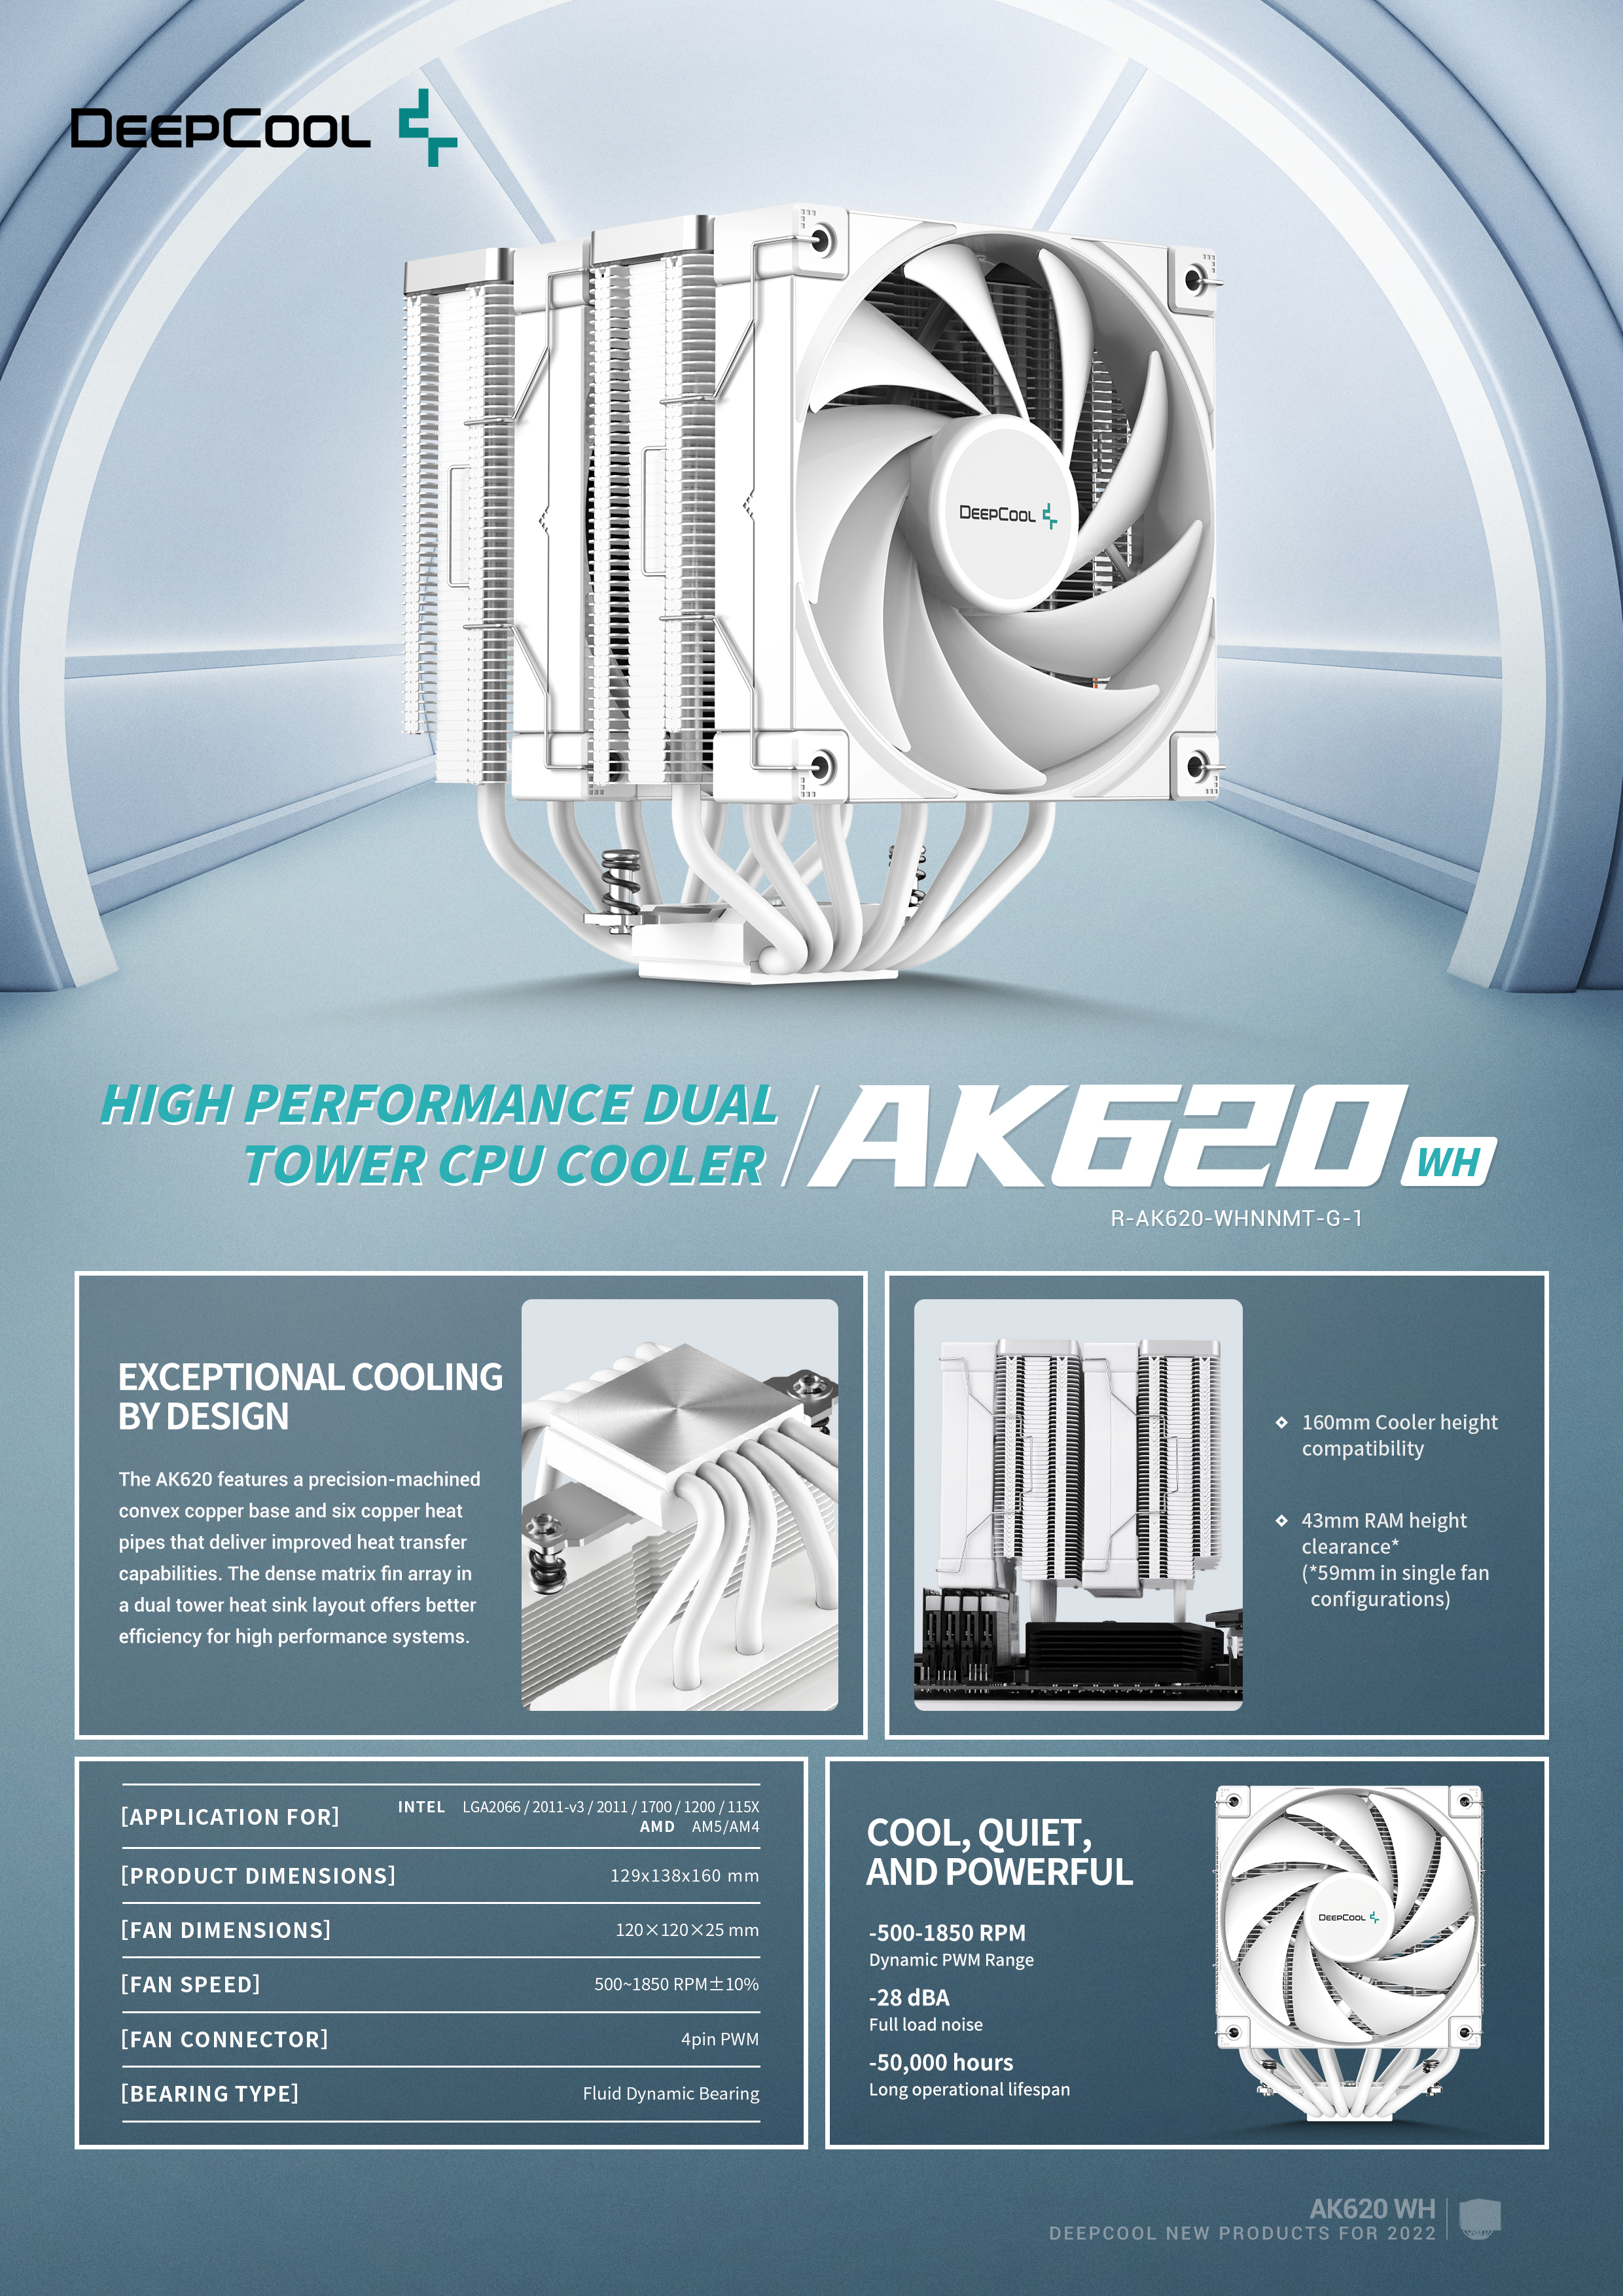 A large marketing image providing additional information about the product DeepCool AK620 White CPU Air Cooler - Additional alt info not provided